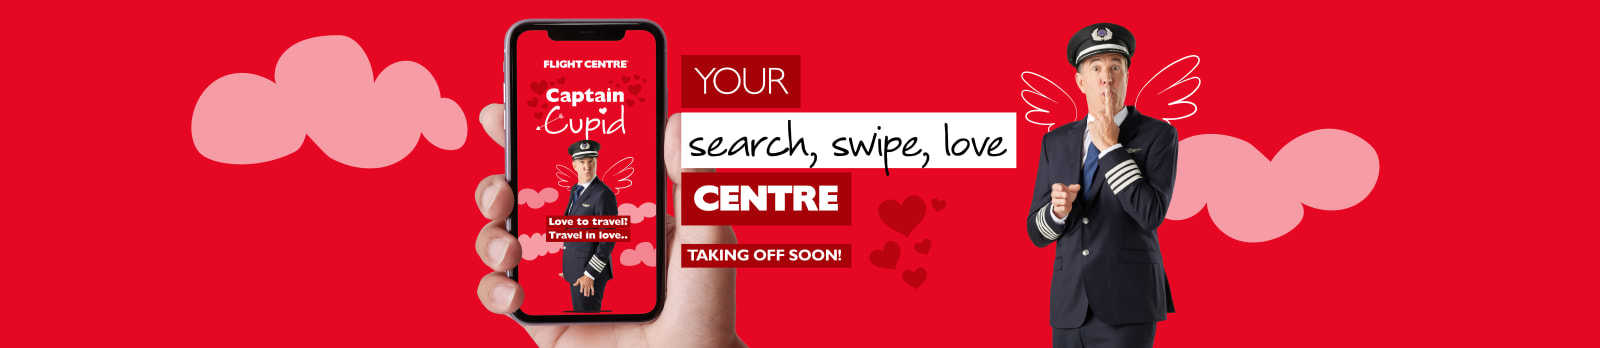 Your search, swipe, love centre - taking off soon! Hand holding a phone with a pilot posing suggestively in front of a red cupid background